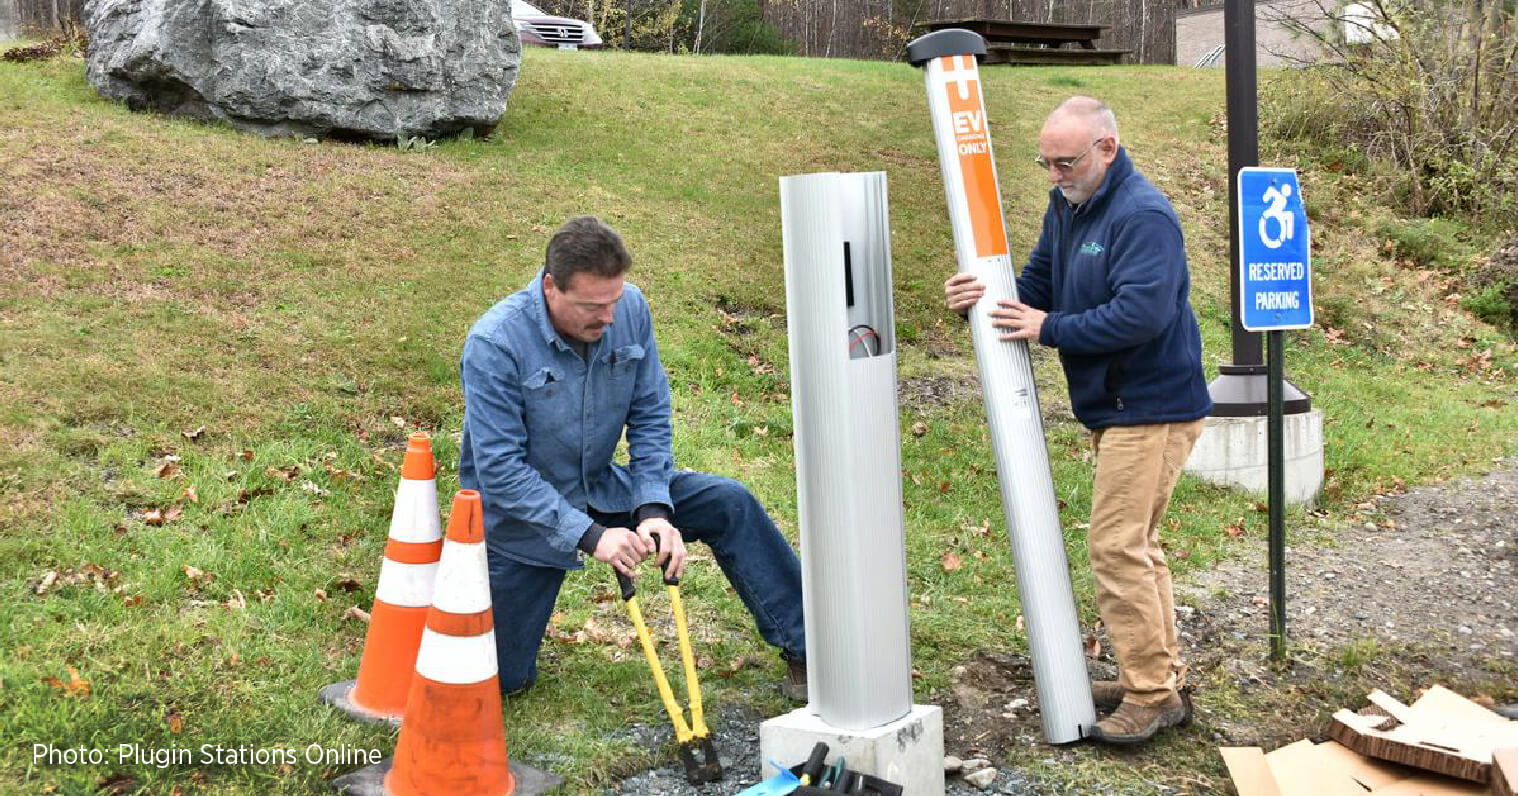 John Doran and an employee installing a ChargePoint station